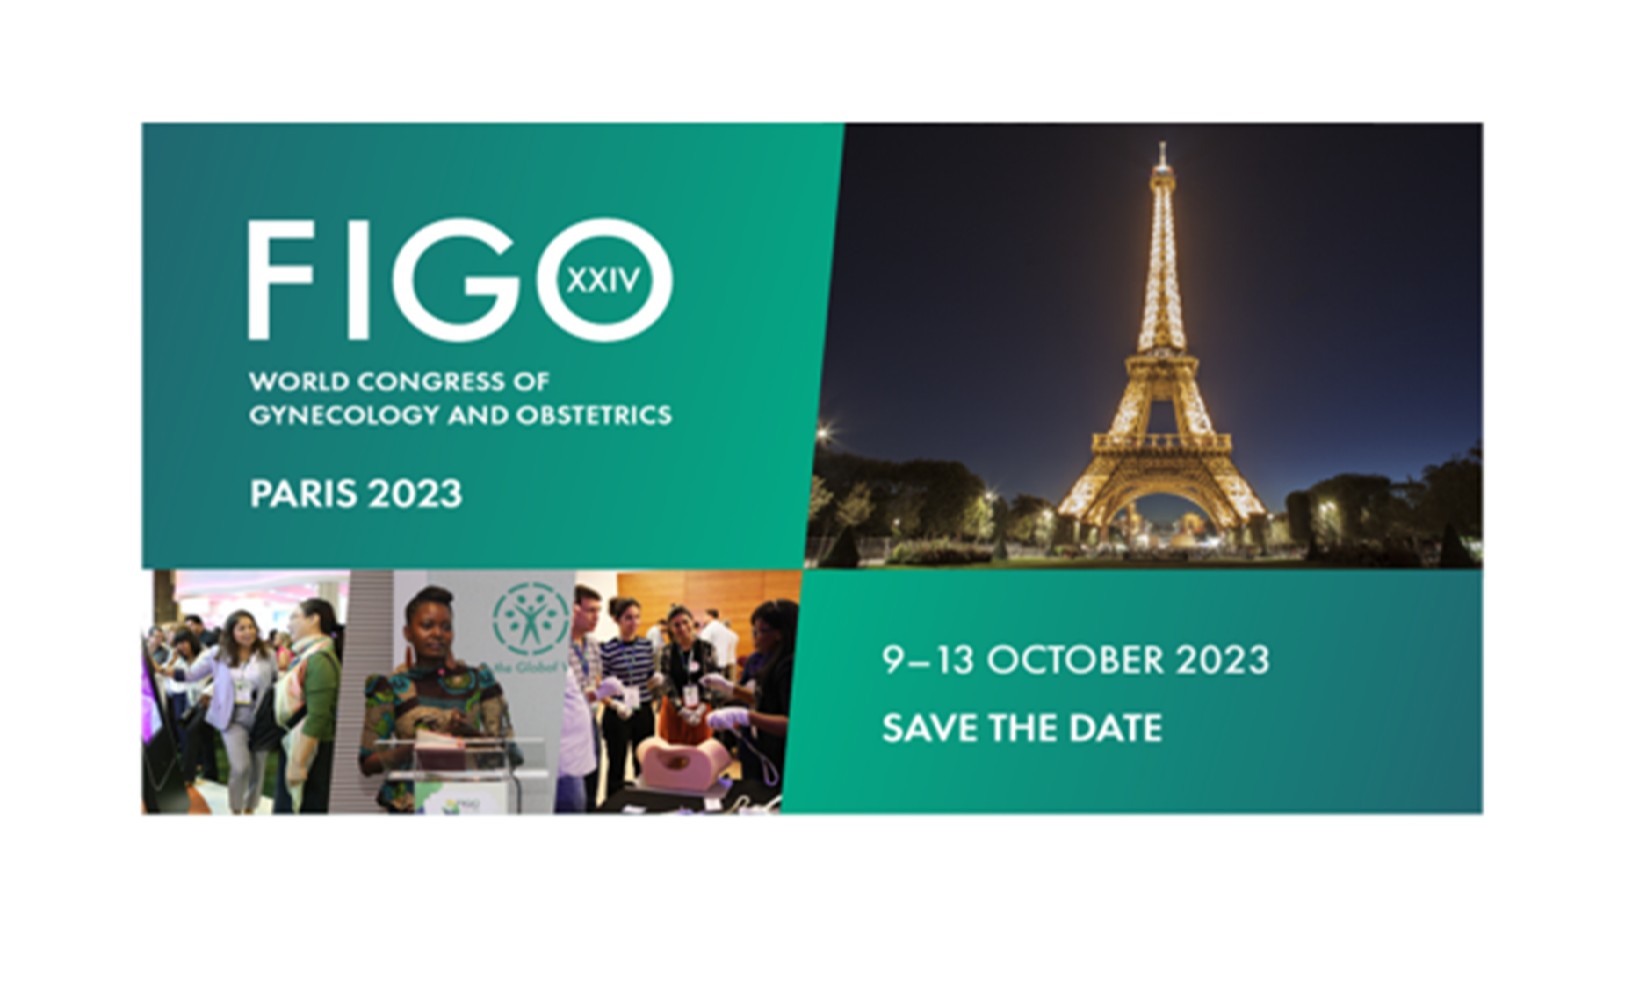 FIGO PARIS 2023 ABSTRACT SUBMISSIONS